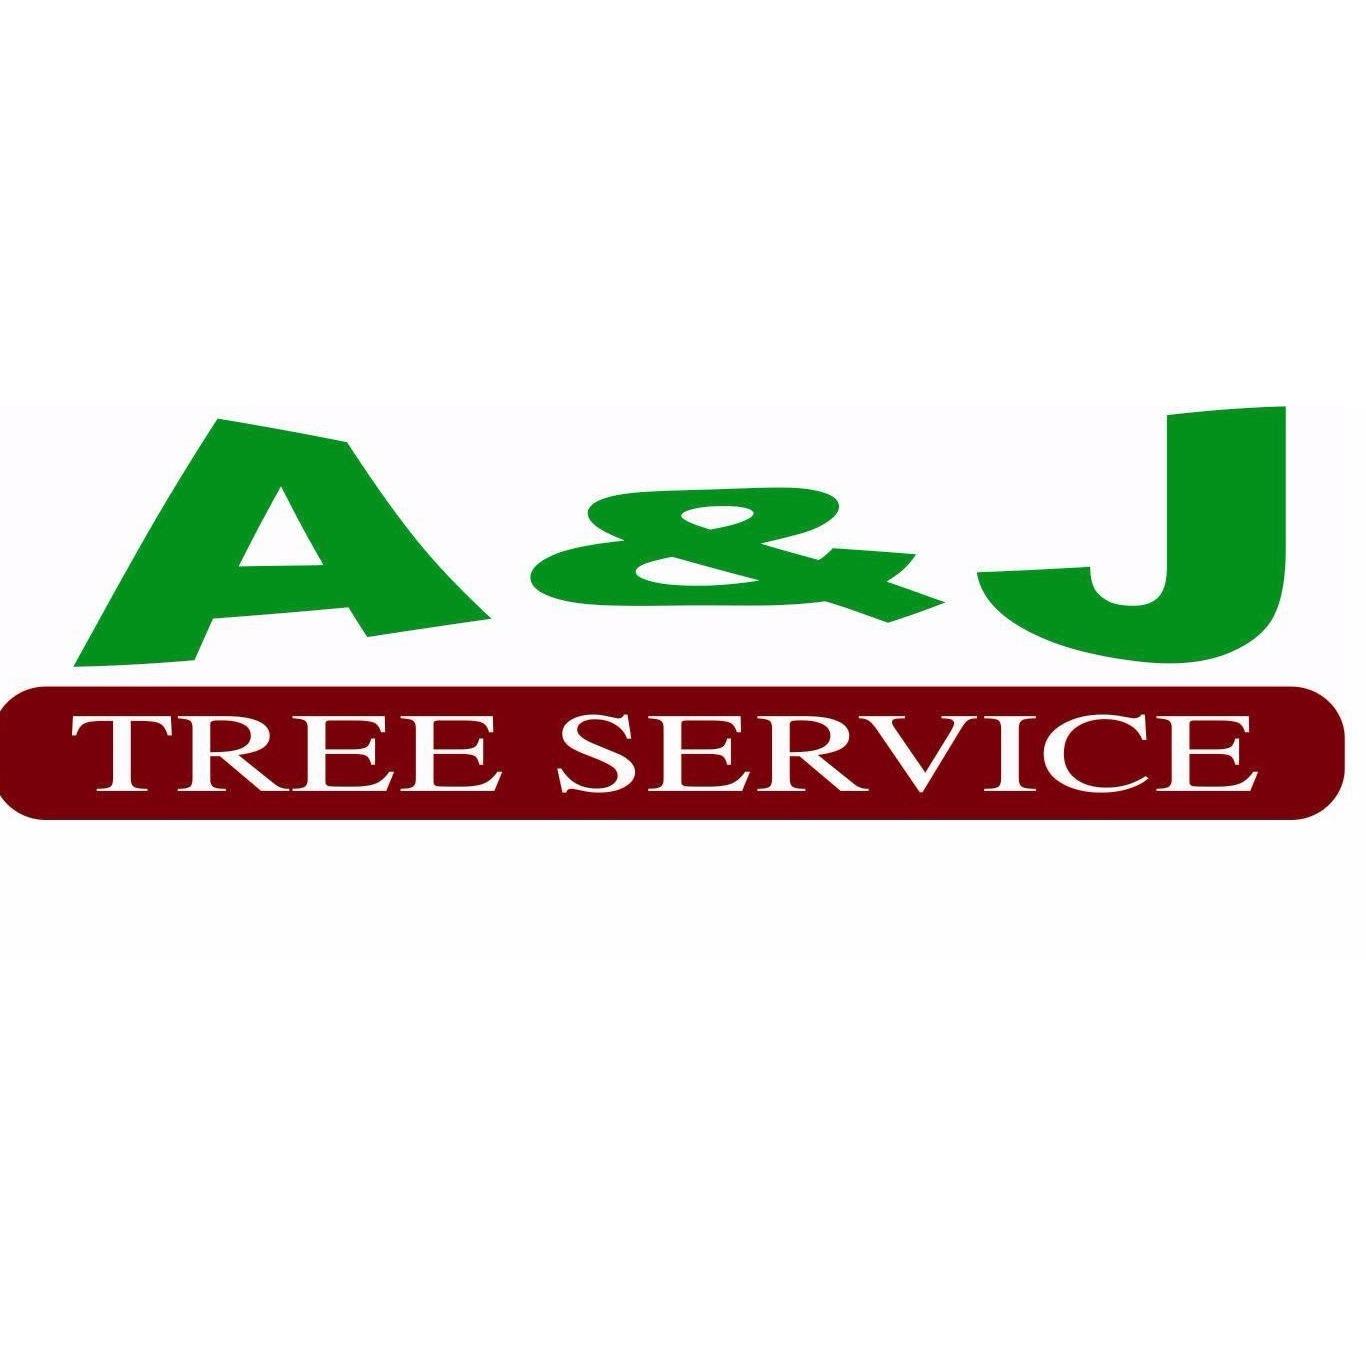 A & J Tree Service Coupons near me in POMONA, CA 91766 ...